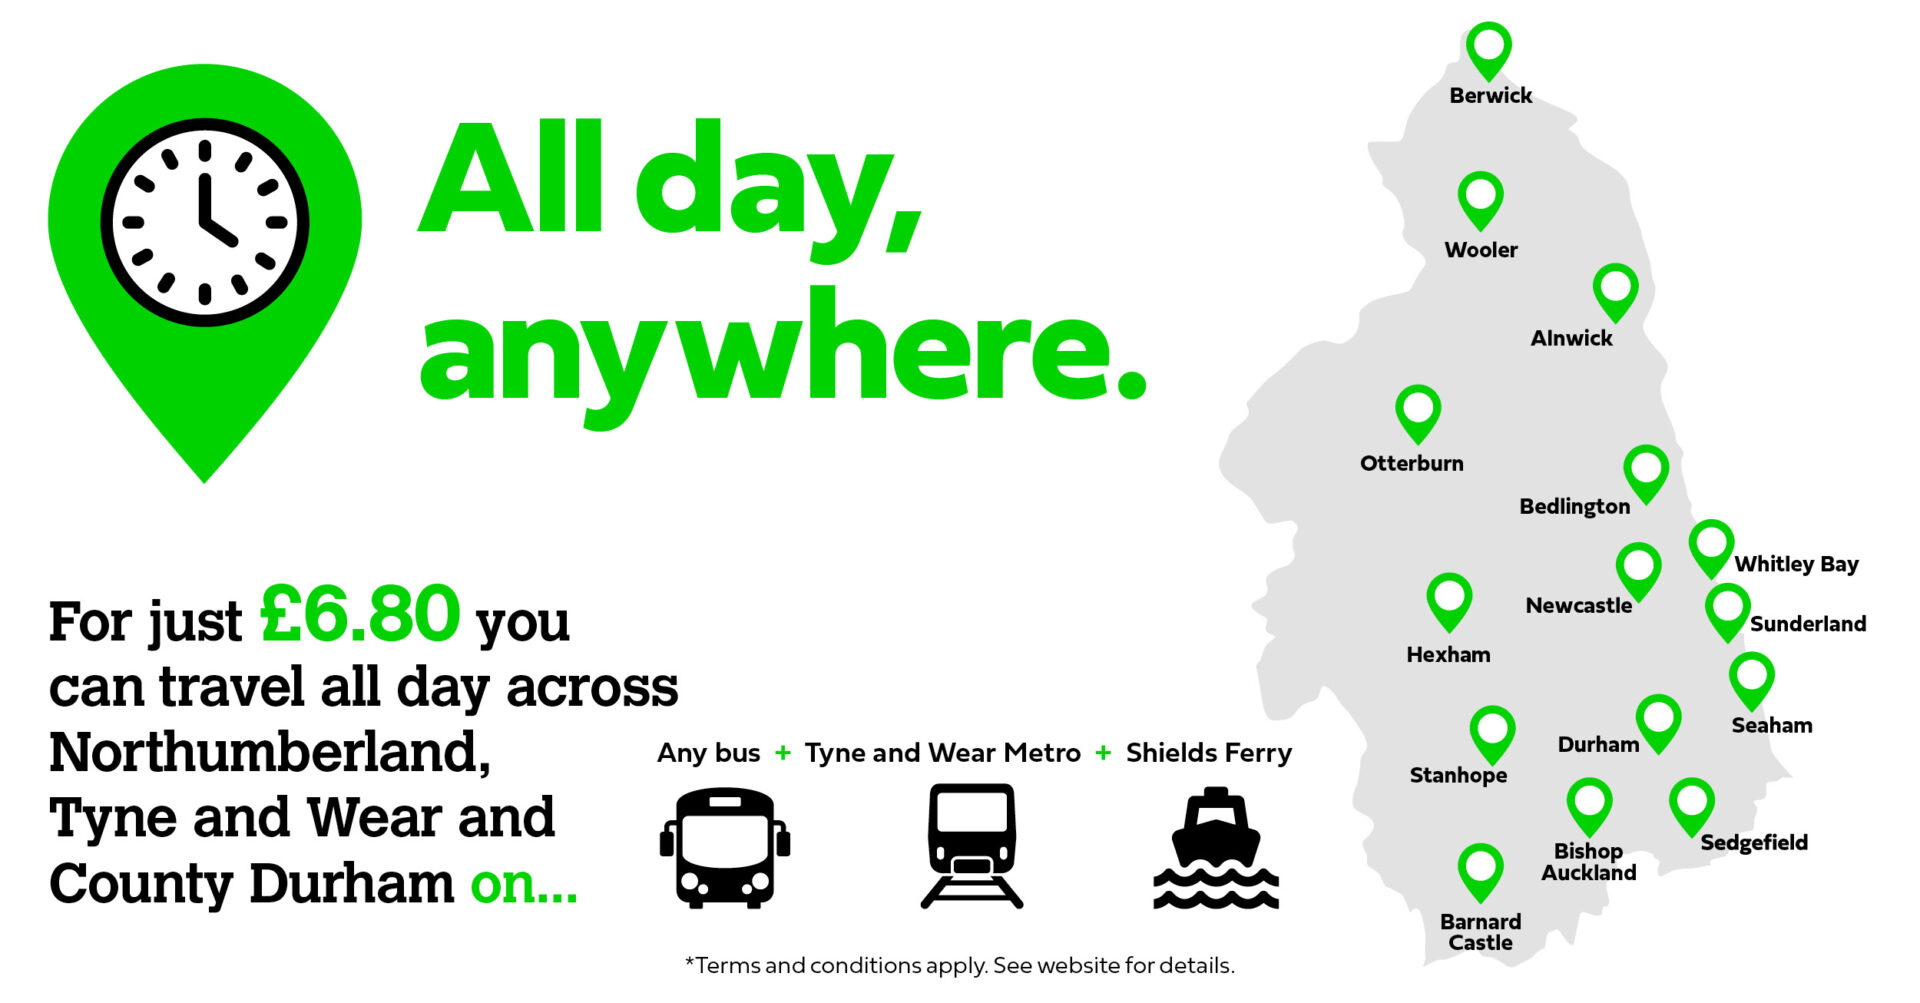 Travel all day anywhere for £6.80 with Transport North East poster